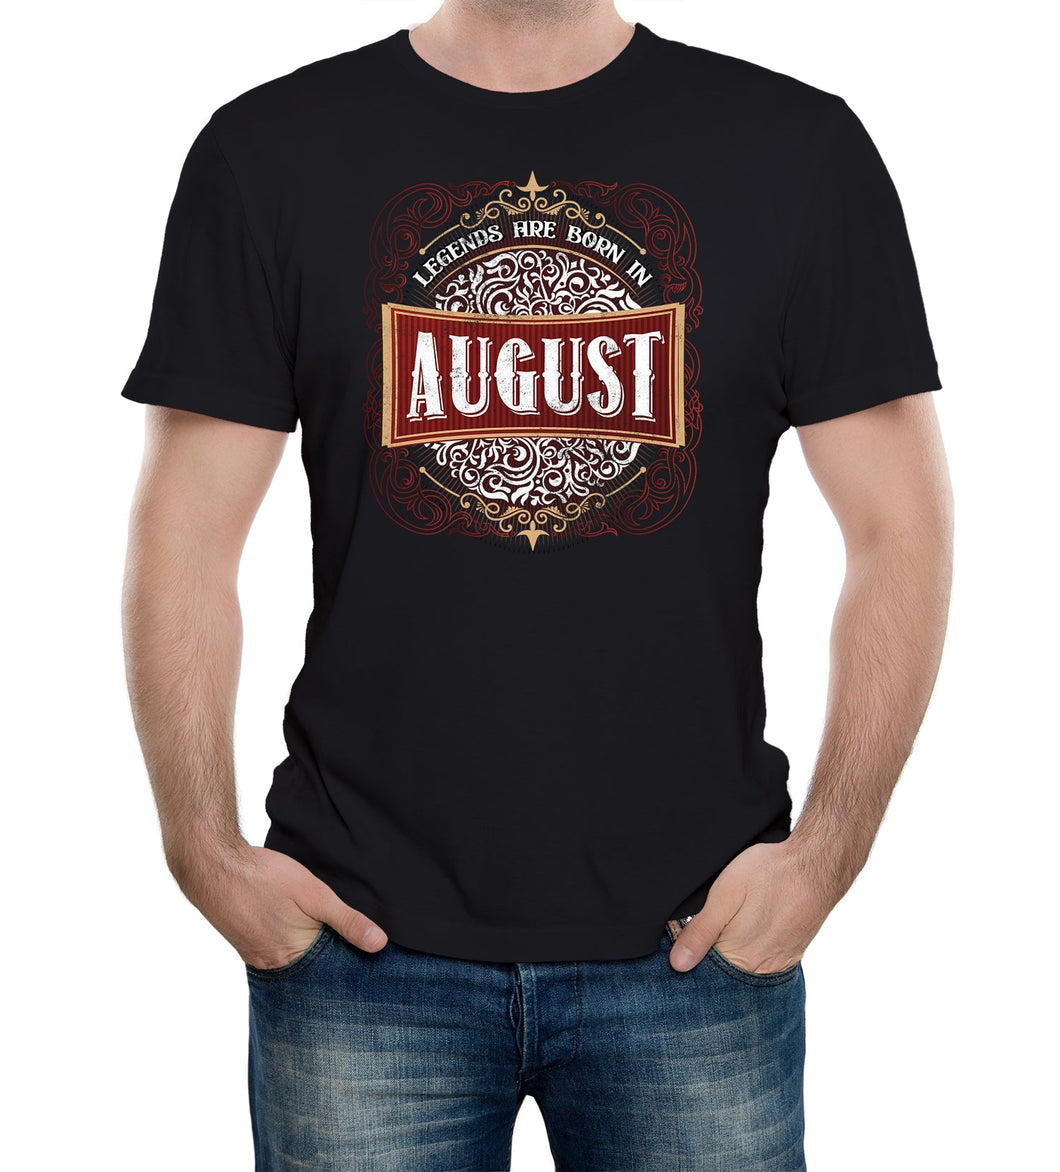 Reality Glitch Only Legends Are Born in August Birthday Mens T-Shirt